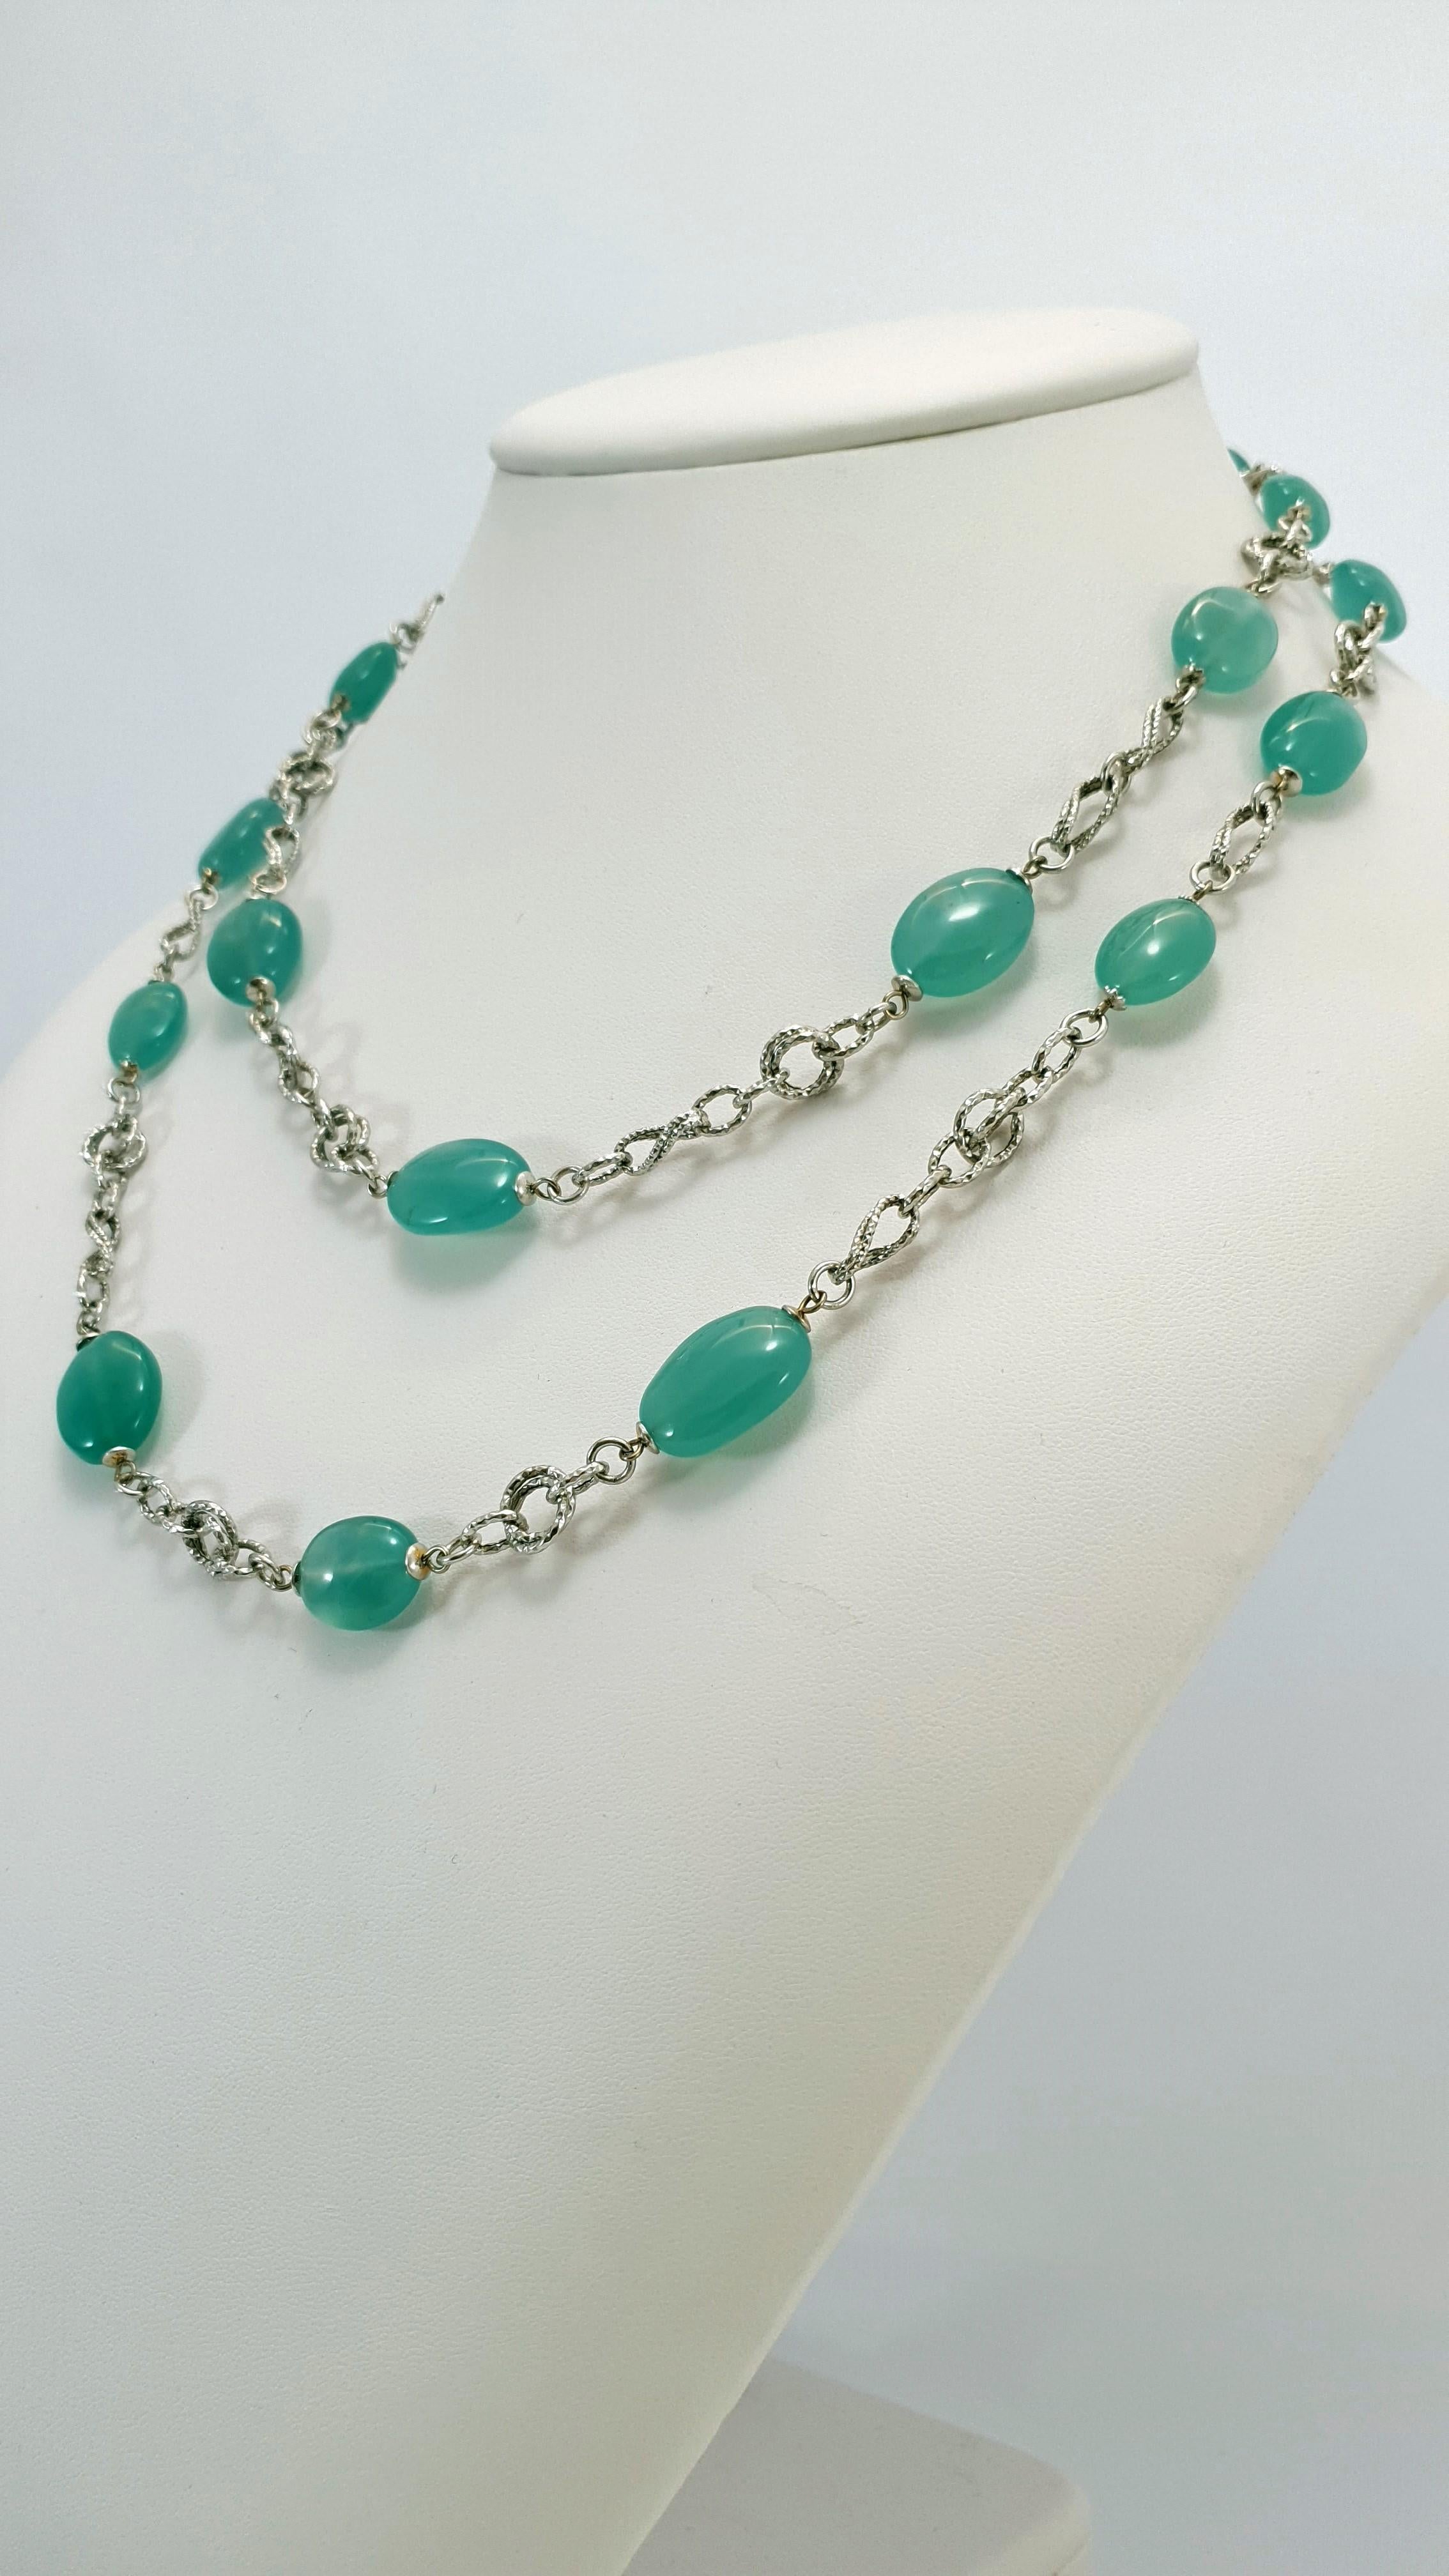 Women's Green Chalcedony Baroque Bead Necklace with 18 Carat White Gold For Sale